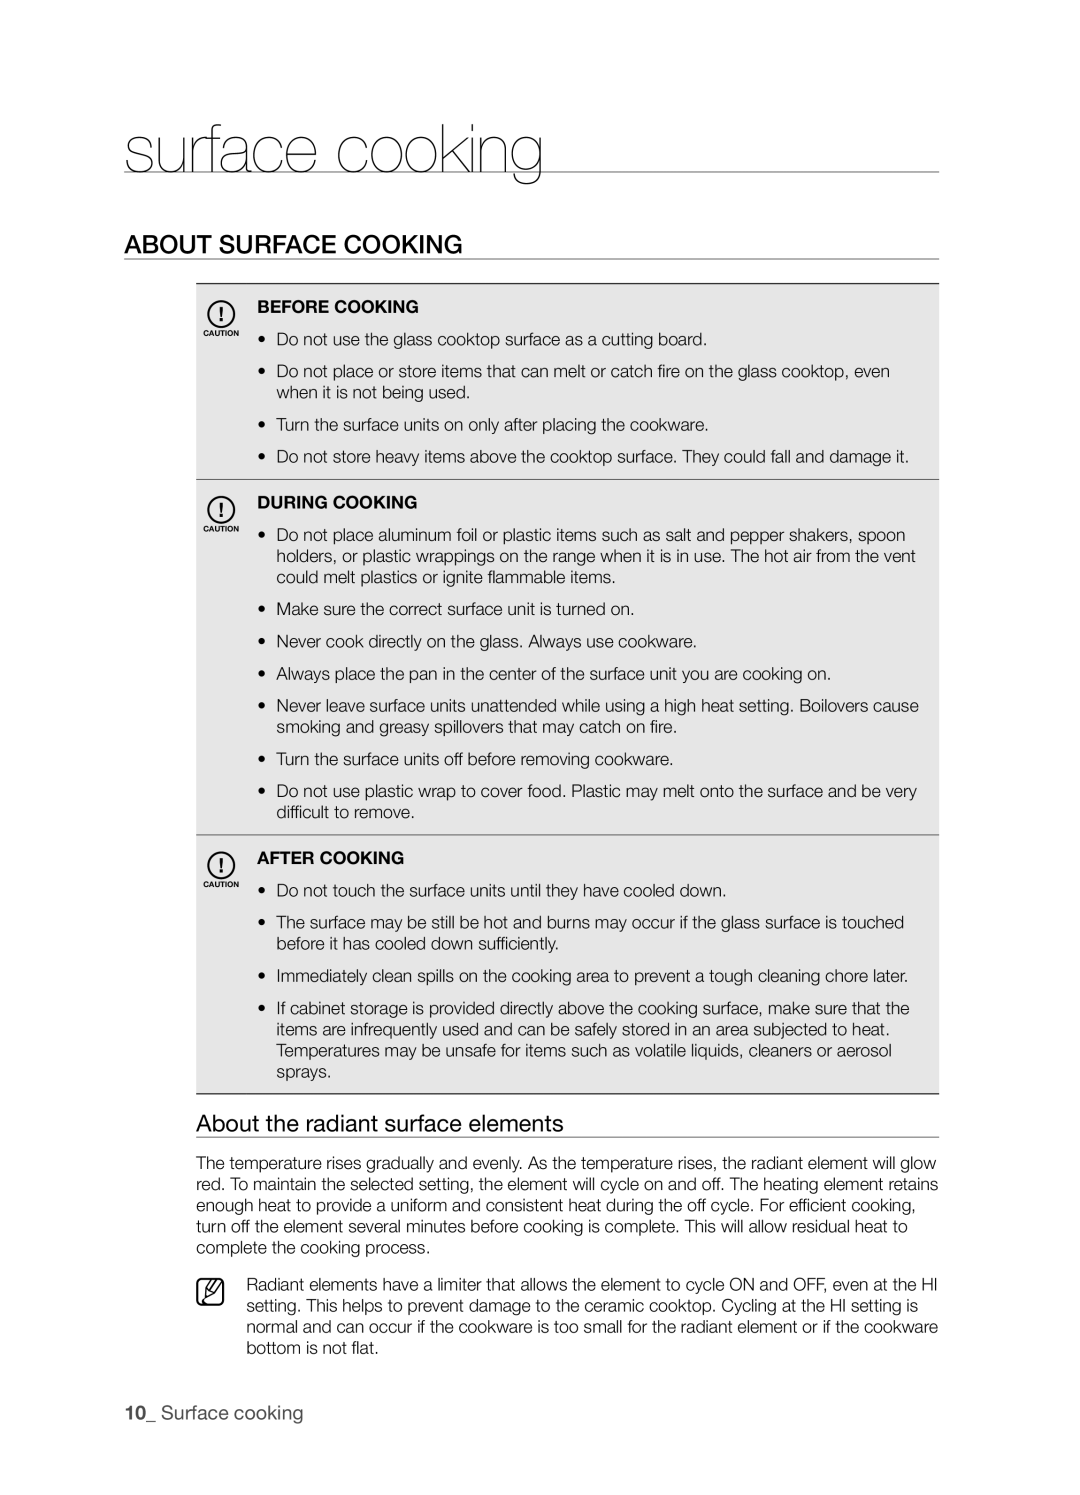 Samsung FTQ386LWUX user manual About surface cooking, About the radiant surface elements, Surface cooking 